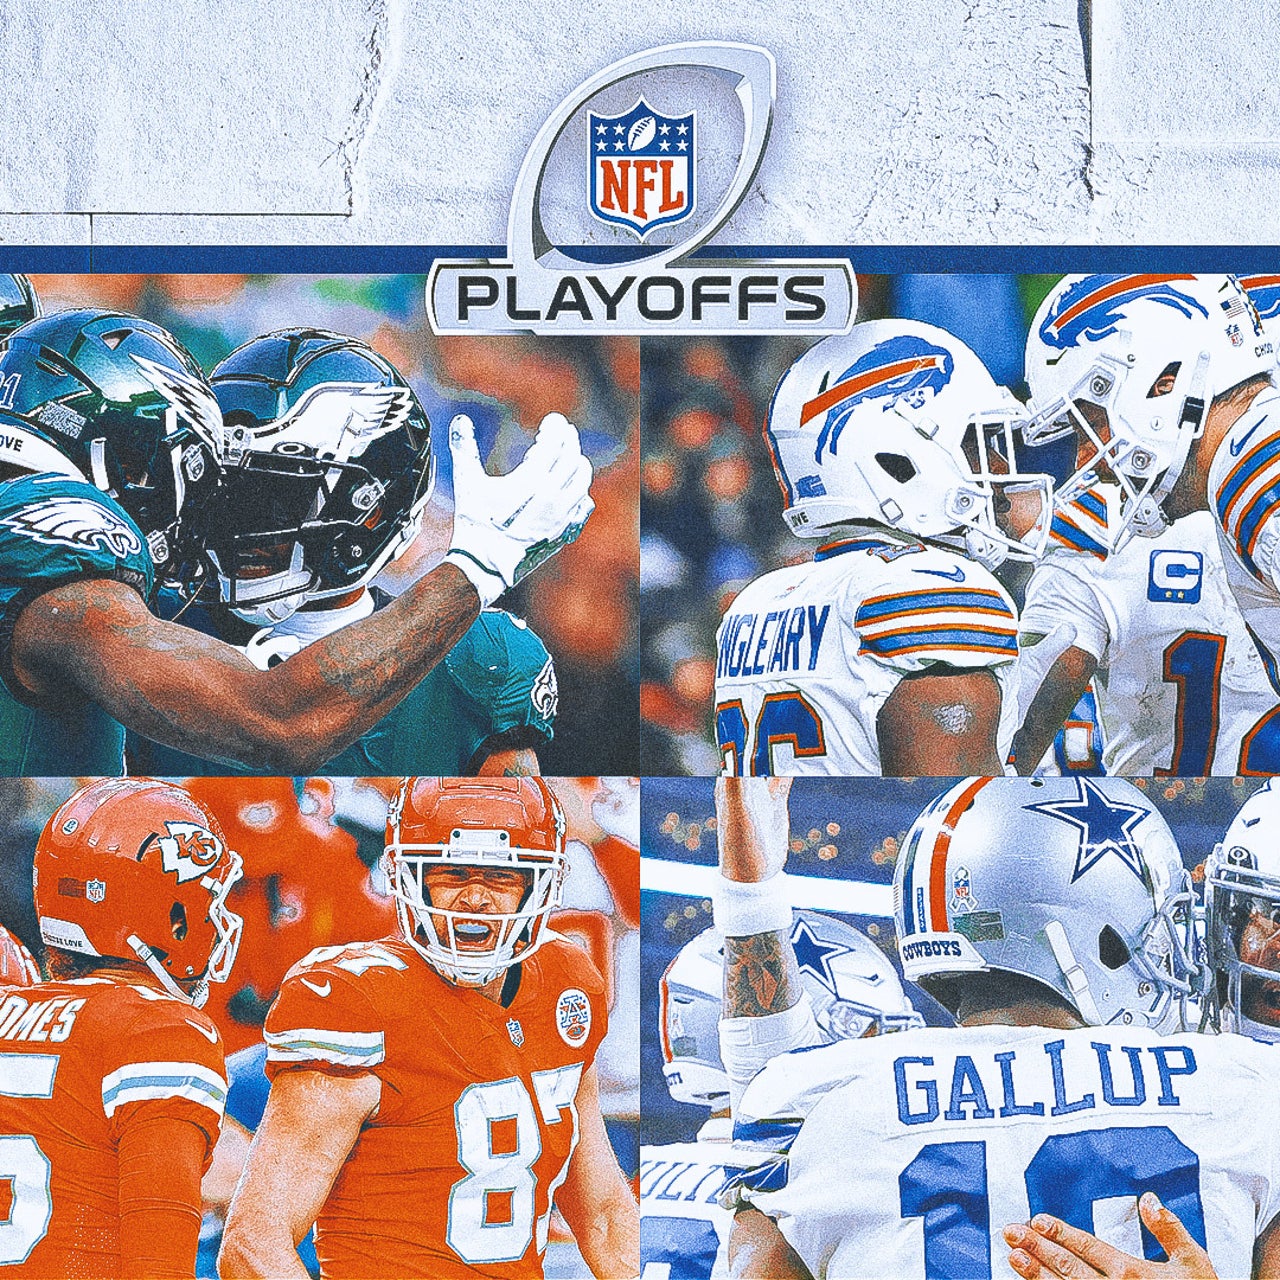 NFL playoff bracket 2022: Divisional playoff matchups, schedule for AFC &  NFC